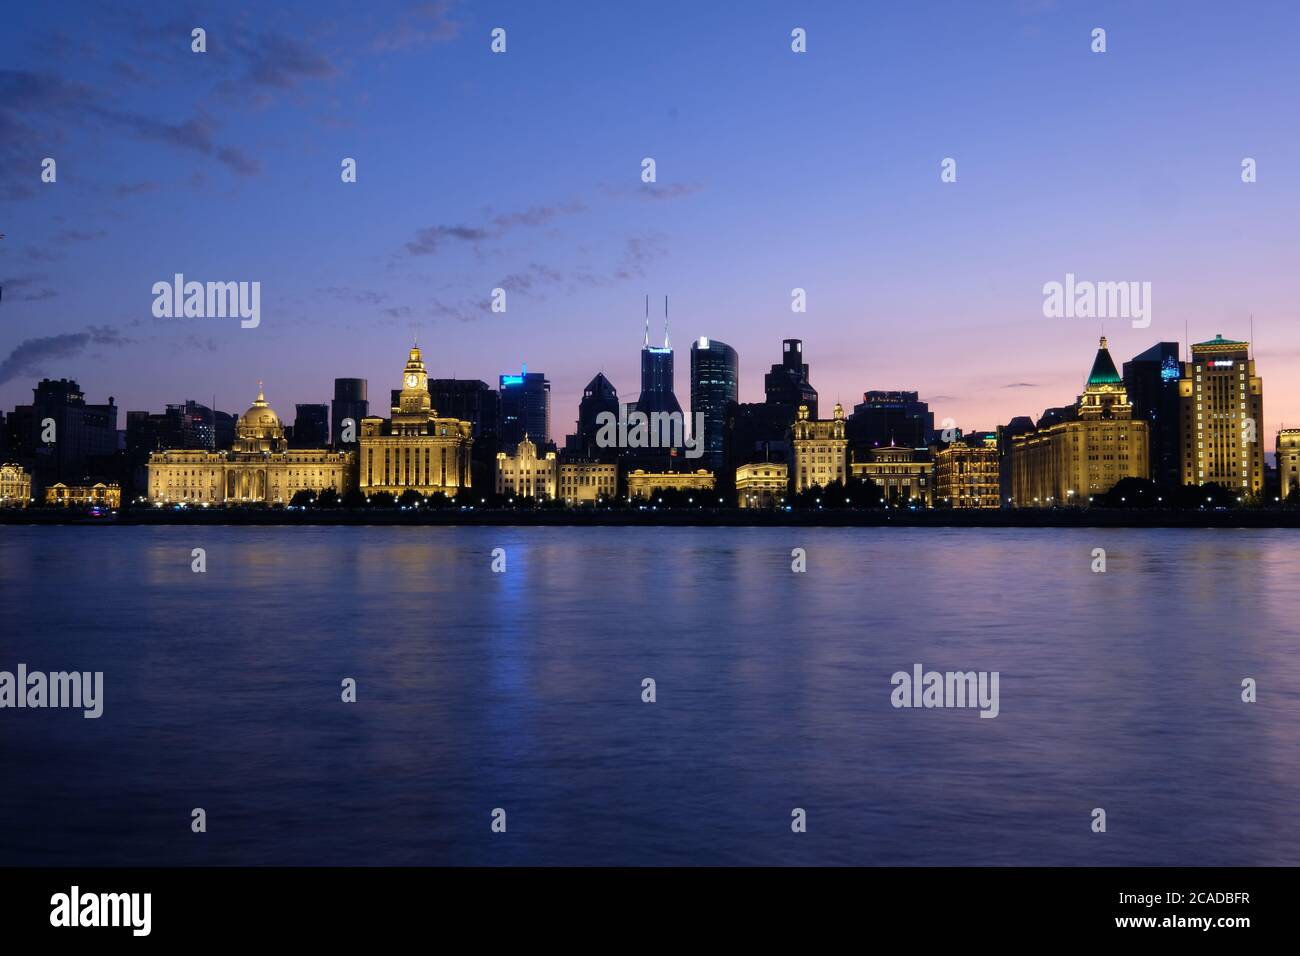 Sunset blue hour of The Bund in Shanghai. Golden illuminated western buildings on the bank of Huangpu River. Long exposure peaceful river. Wide angle Stock Photo